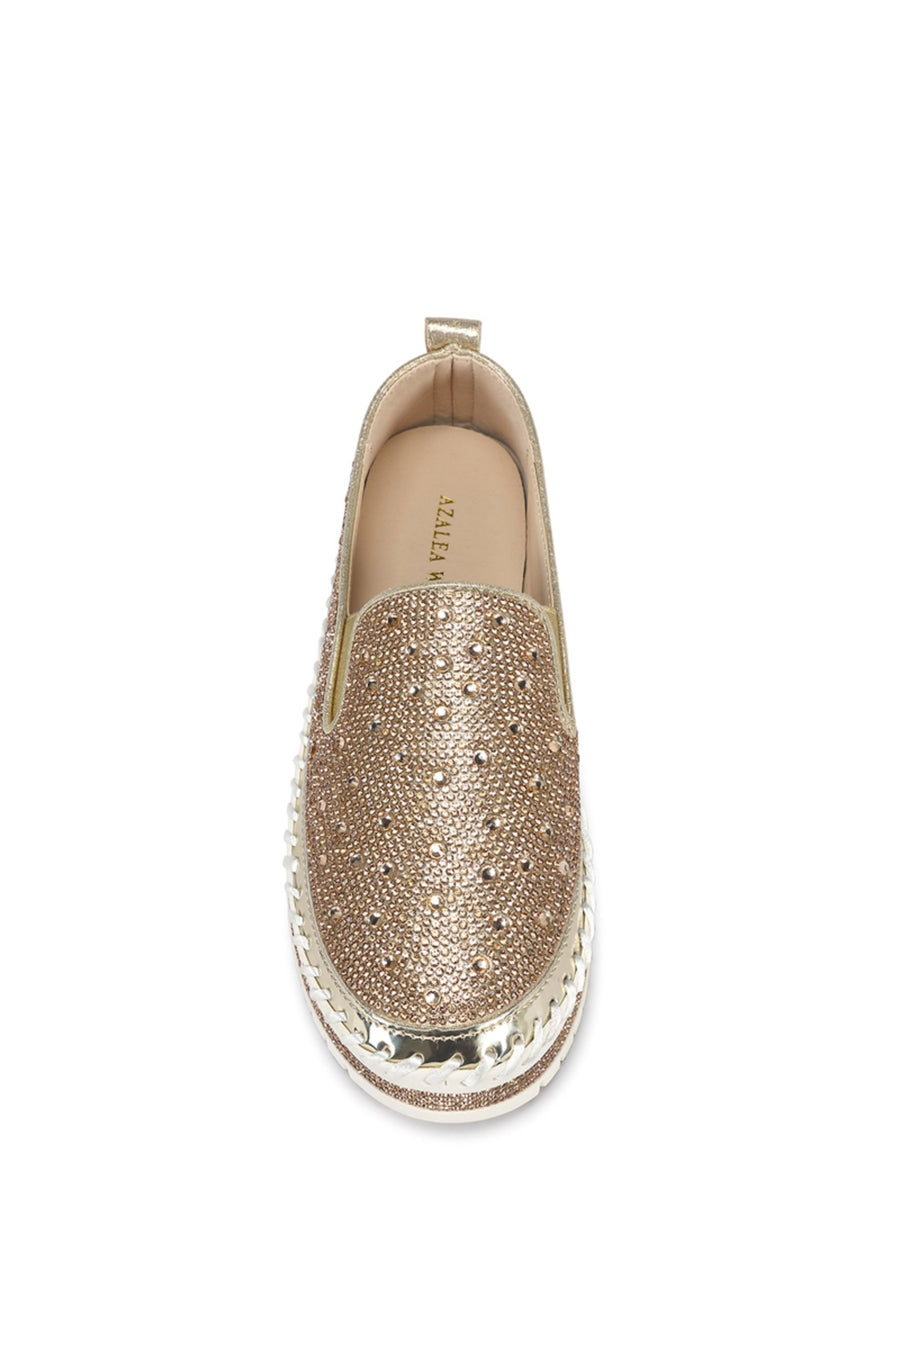 top view of slip on metallic rose gold flat sneakers with crystal rhinestone embellishments and a white braided platform sole